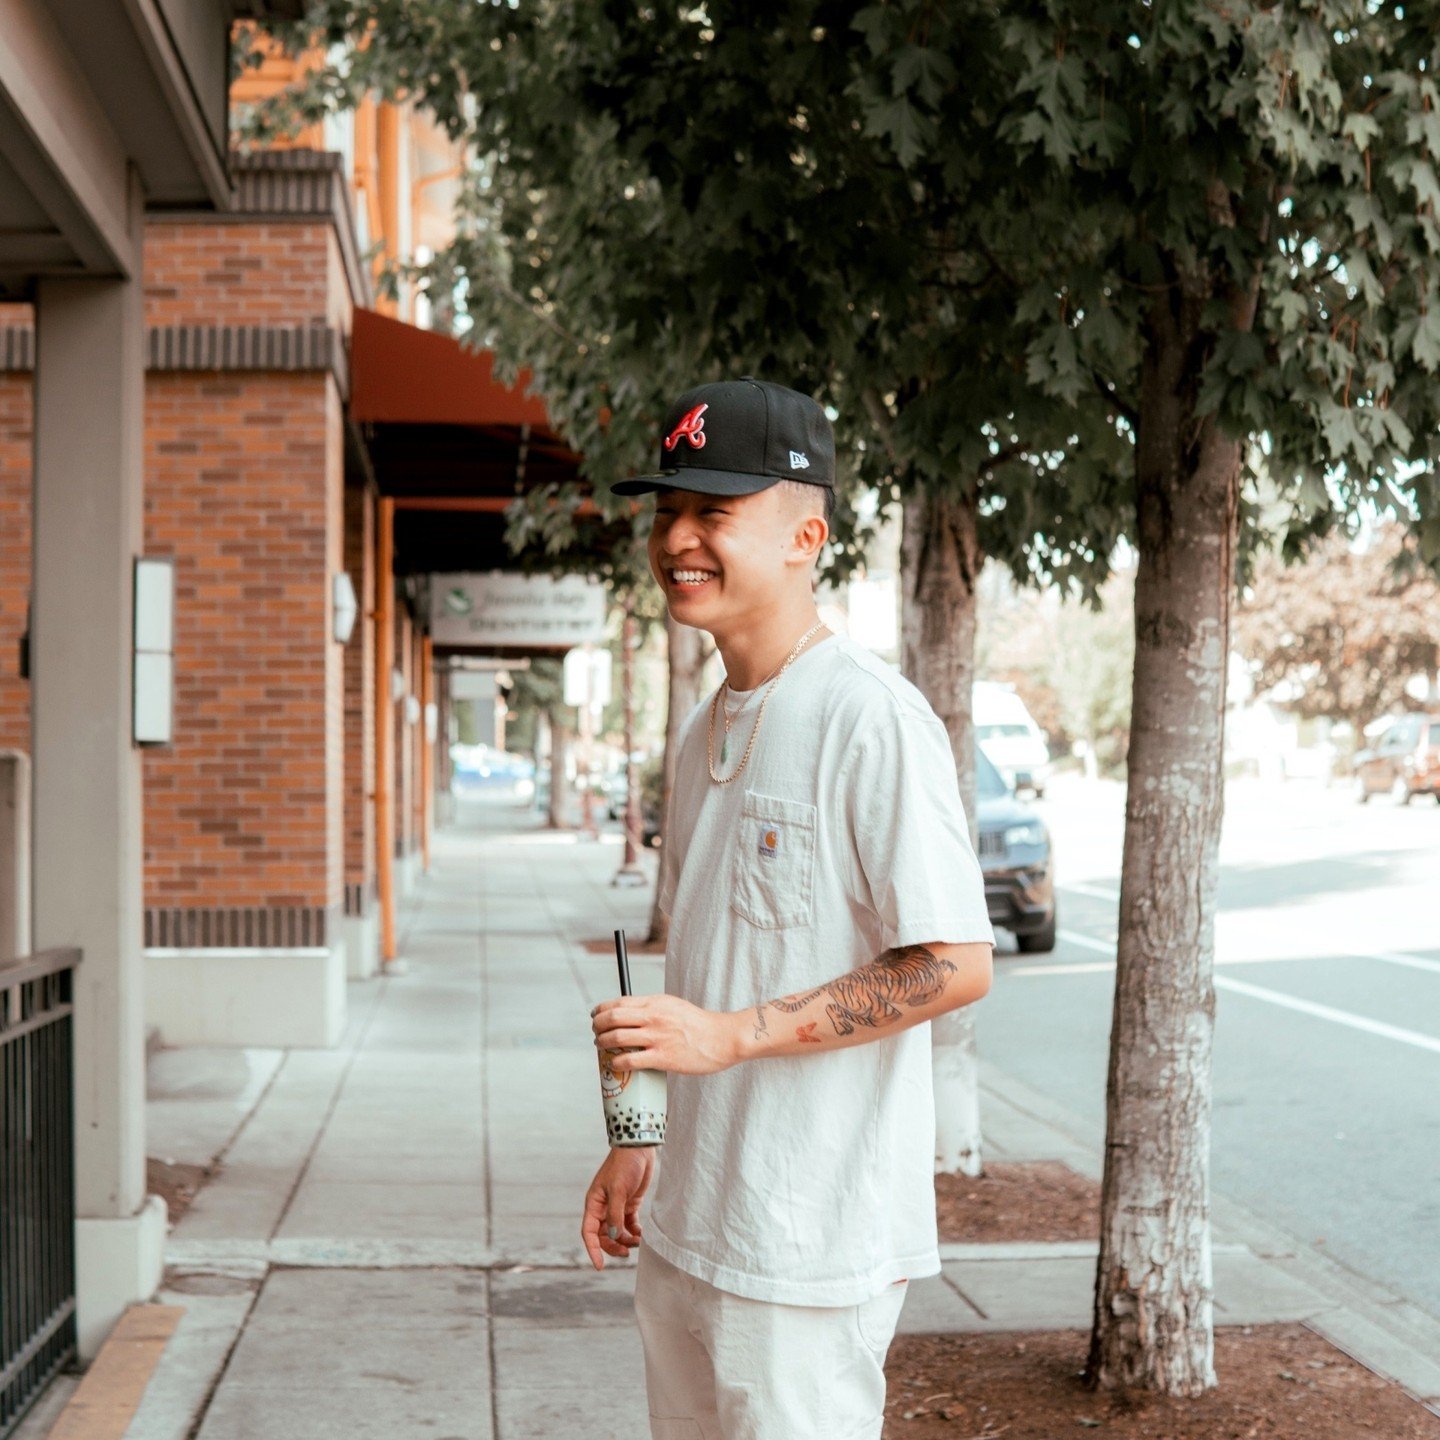 Good laughs, good company, and good boba!! ✨🧋

As the sunnier weather approaches, you'll want to stop by our Kirkland location! Conveniently located minutes away from Juanita Beach, grab a drink and walk over to enjoy the sun by the water! ☀️

.
.
.